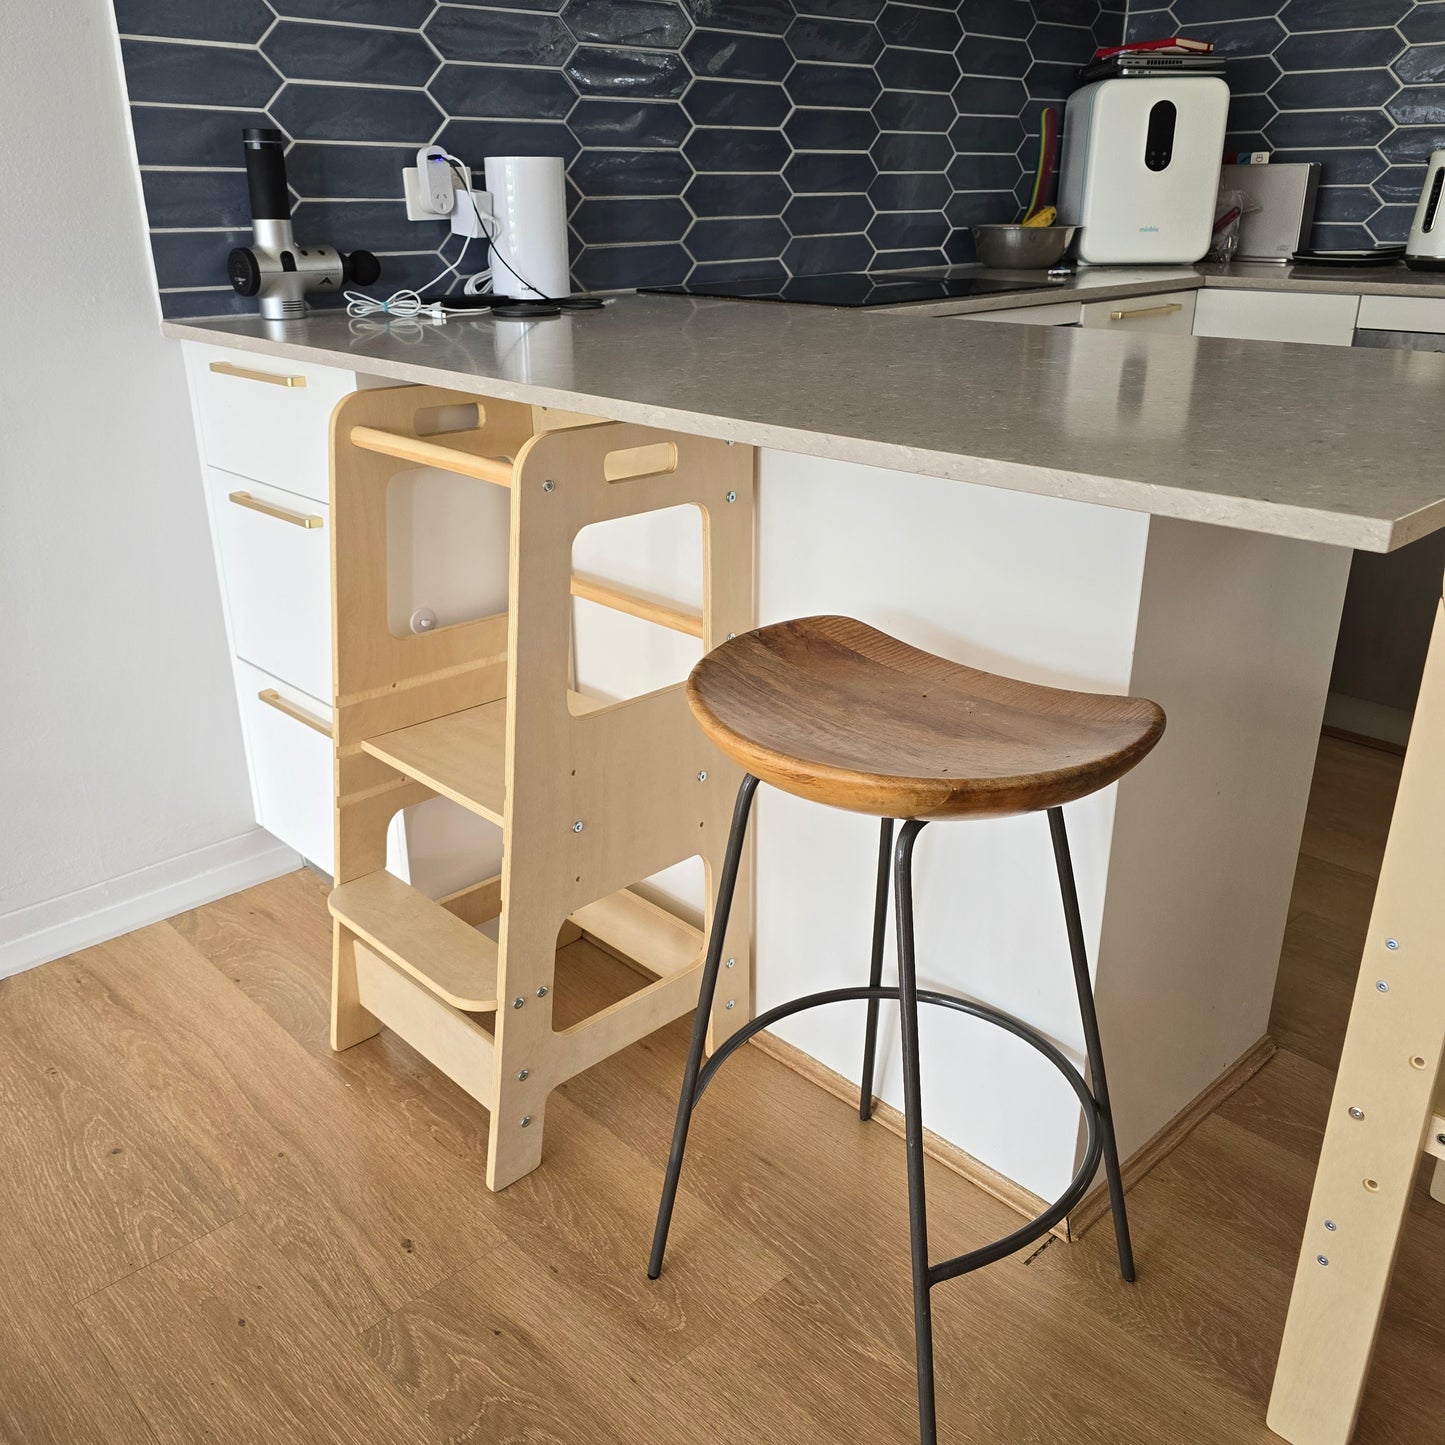 The Natural Adjustable Learning Tower neatly tucked under a kitchen breakfast bar.